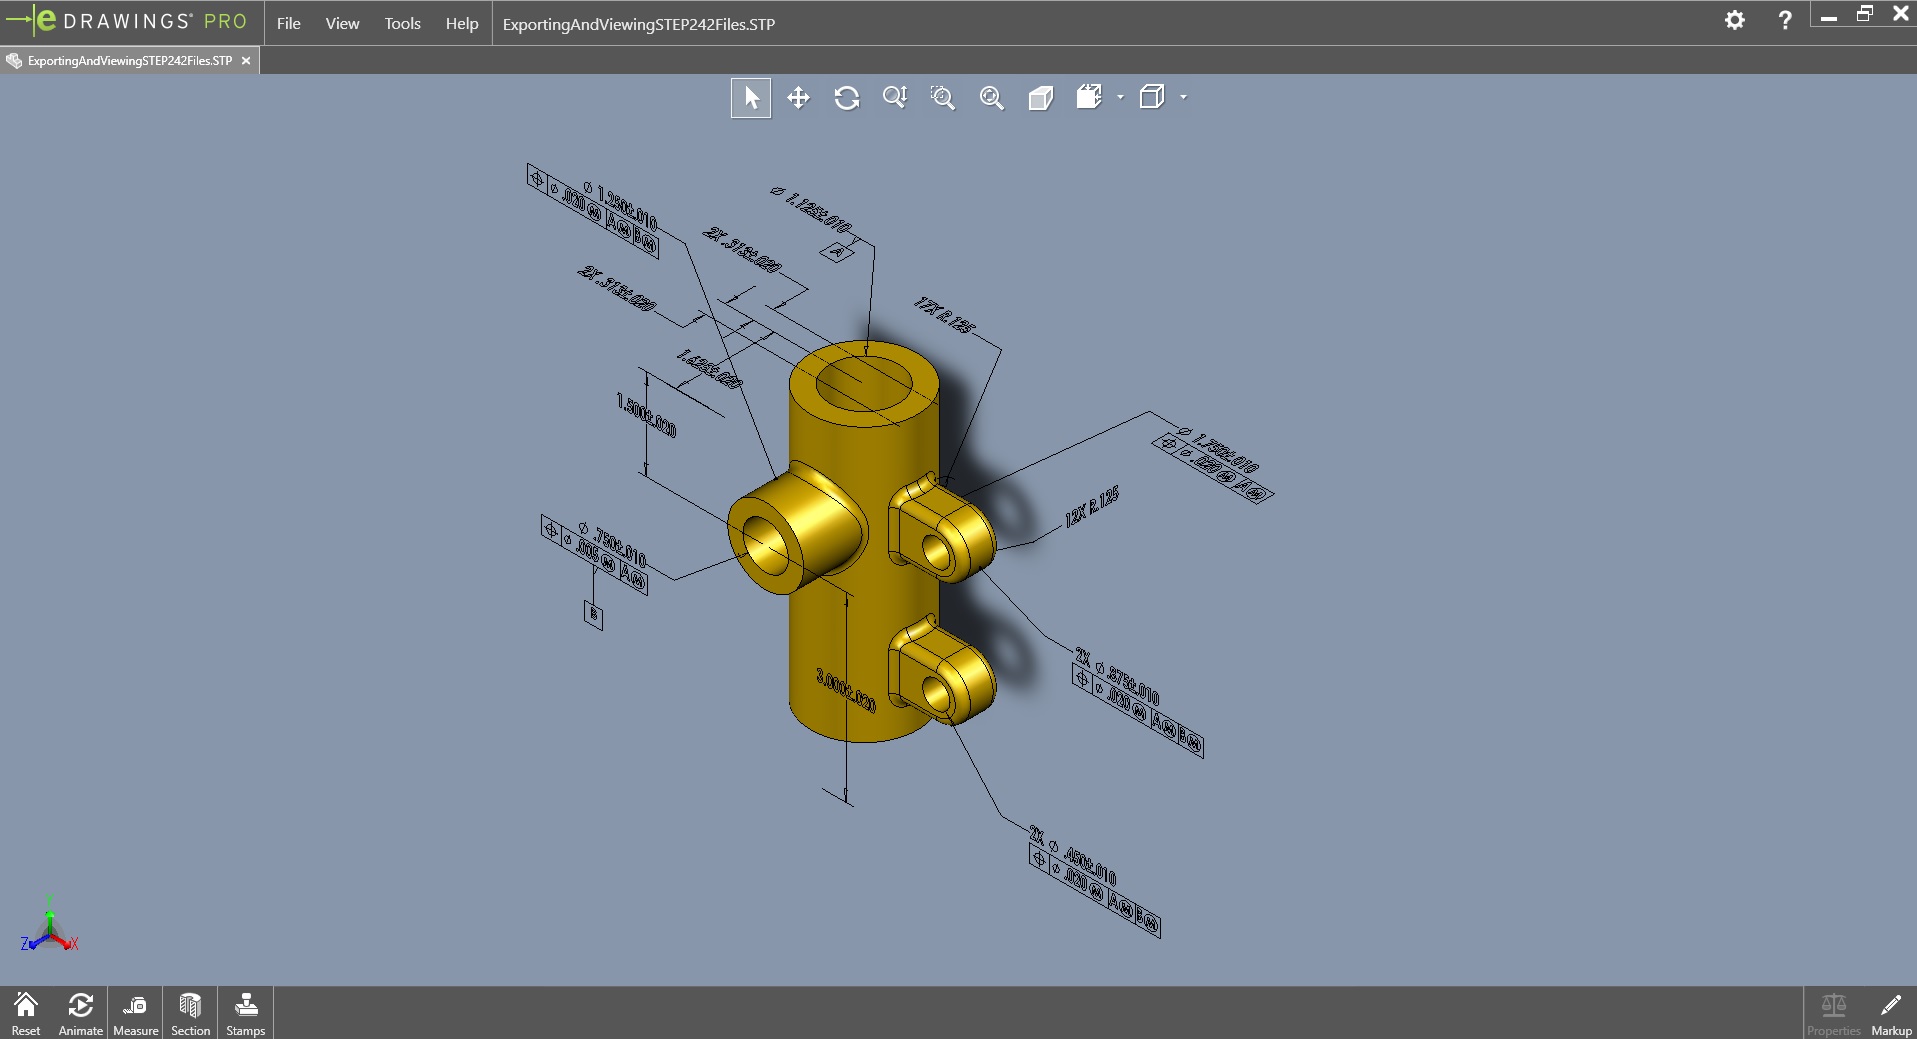 , SOLIDWORKS: Exporting and Viewing STEP 242 Files